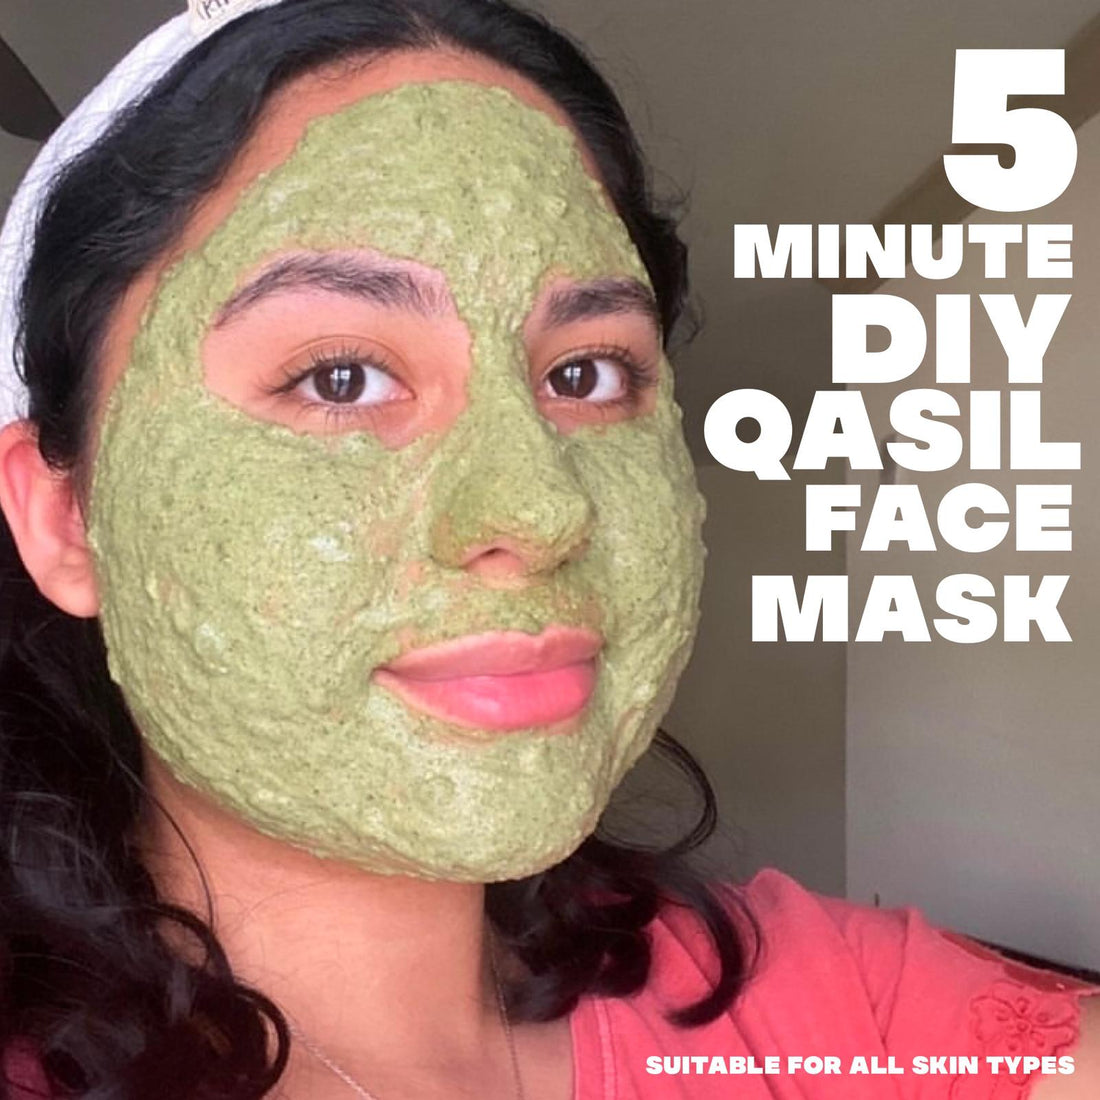 An easy DIY Qasil face mask for all skin types!